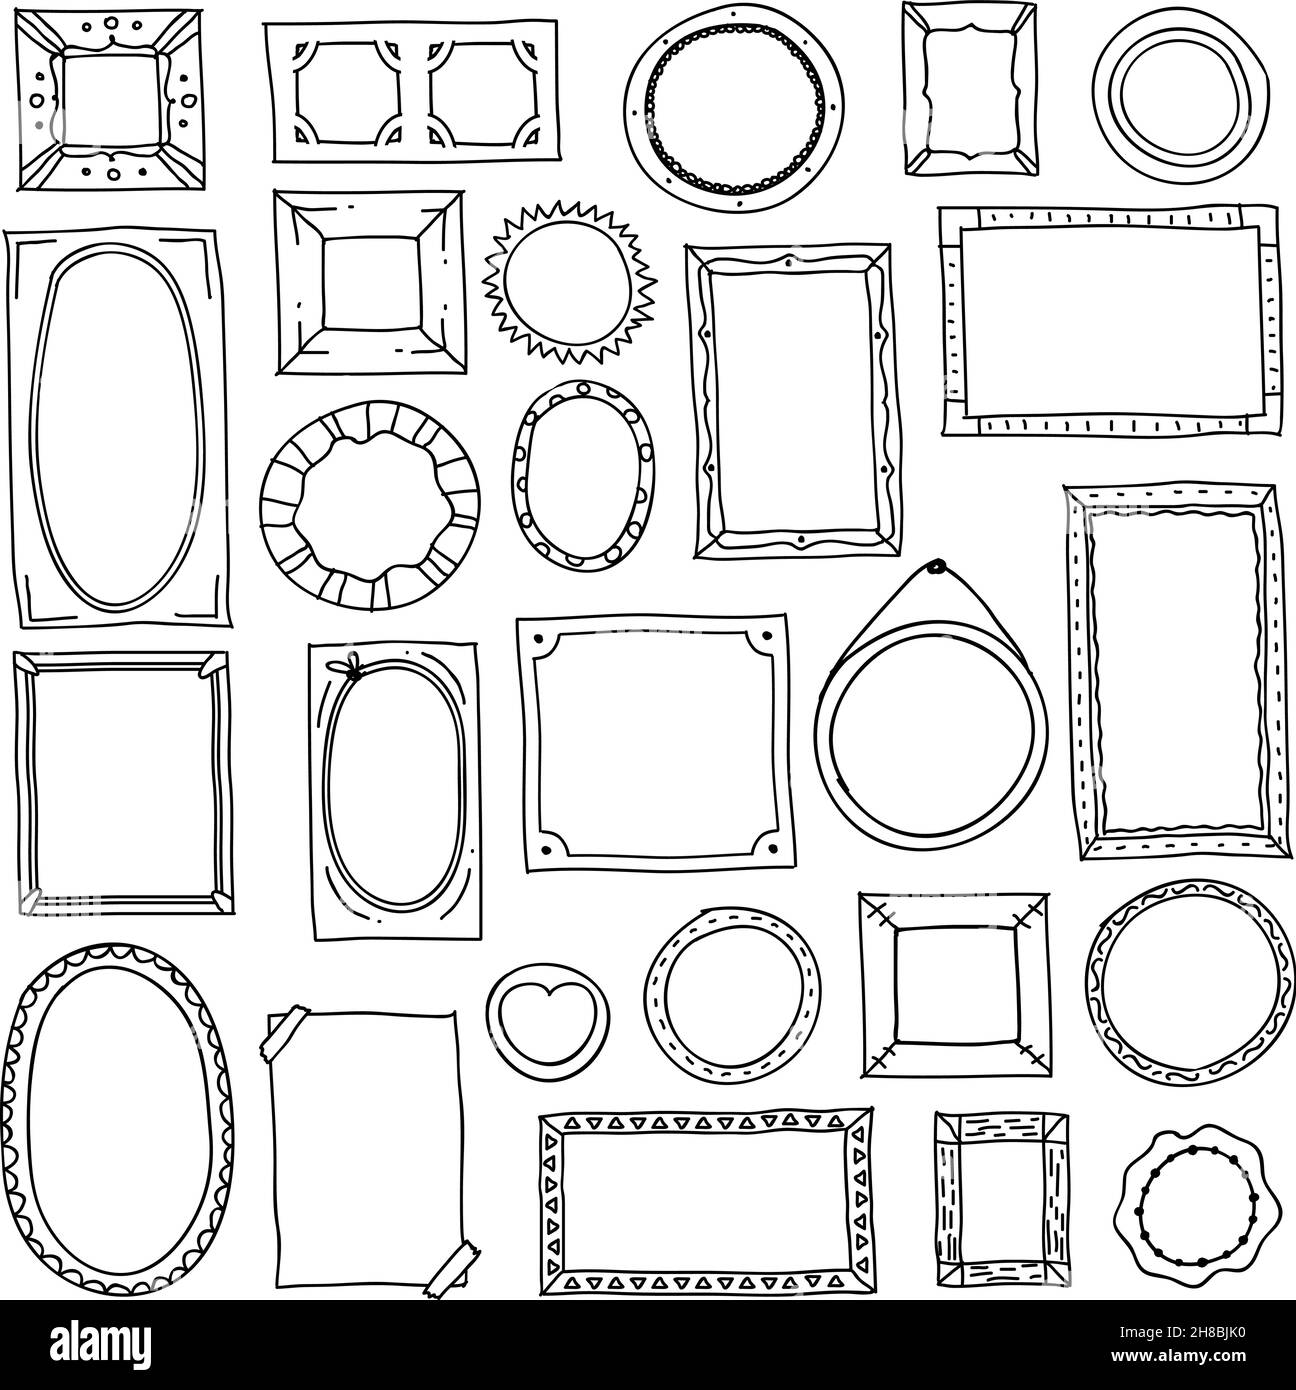 Details more than 70 sketch of photo frame - in.eteachers